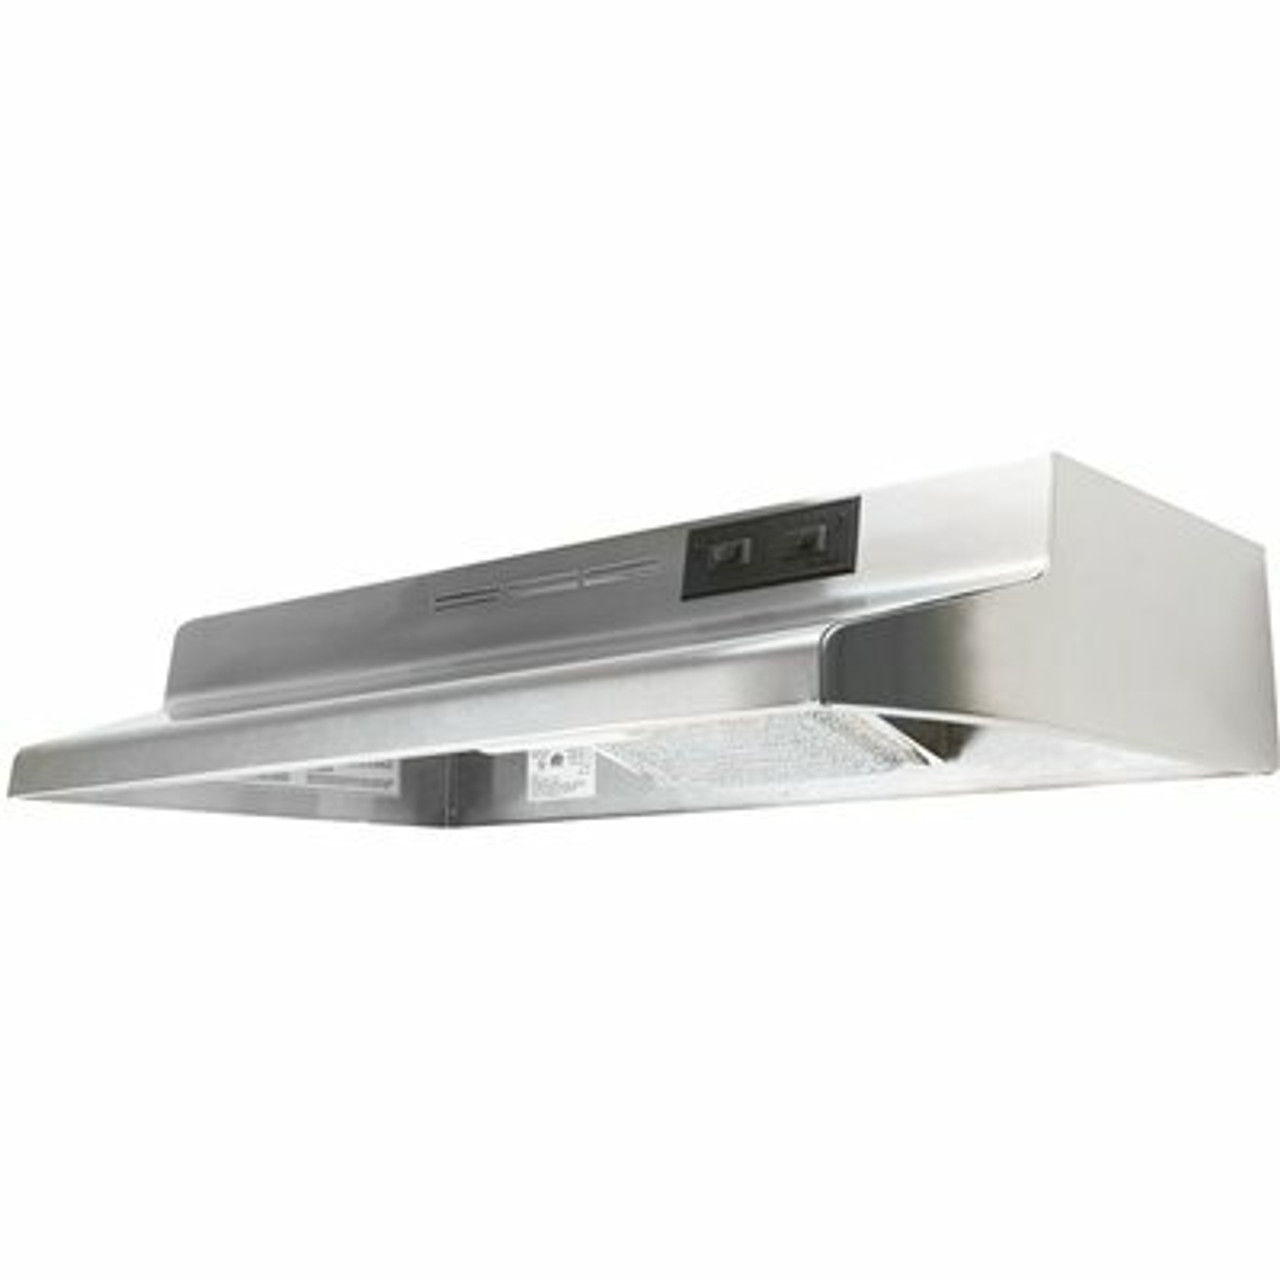 Air King Ad 30 In. Under Cabinet Ductless Range Hood With Light In Stainless Steel